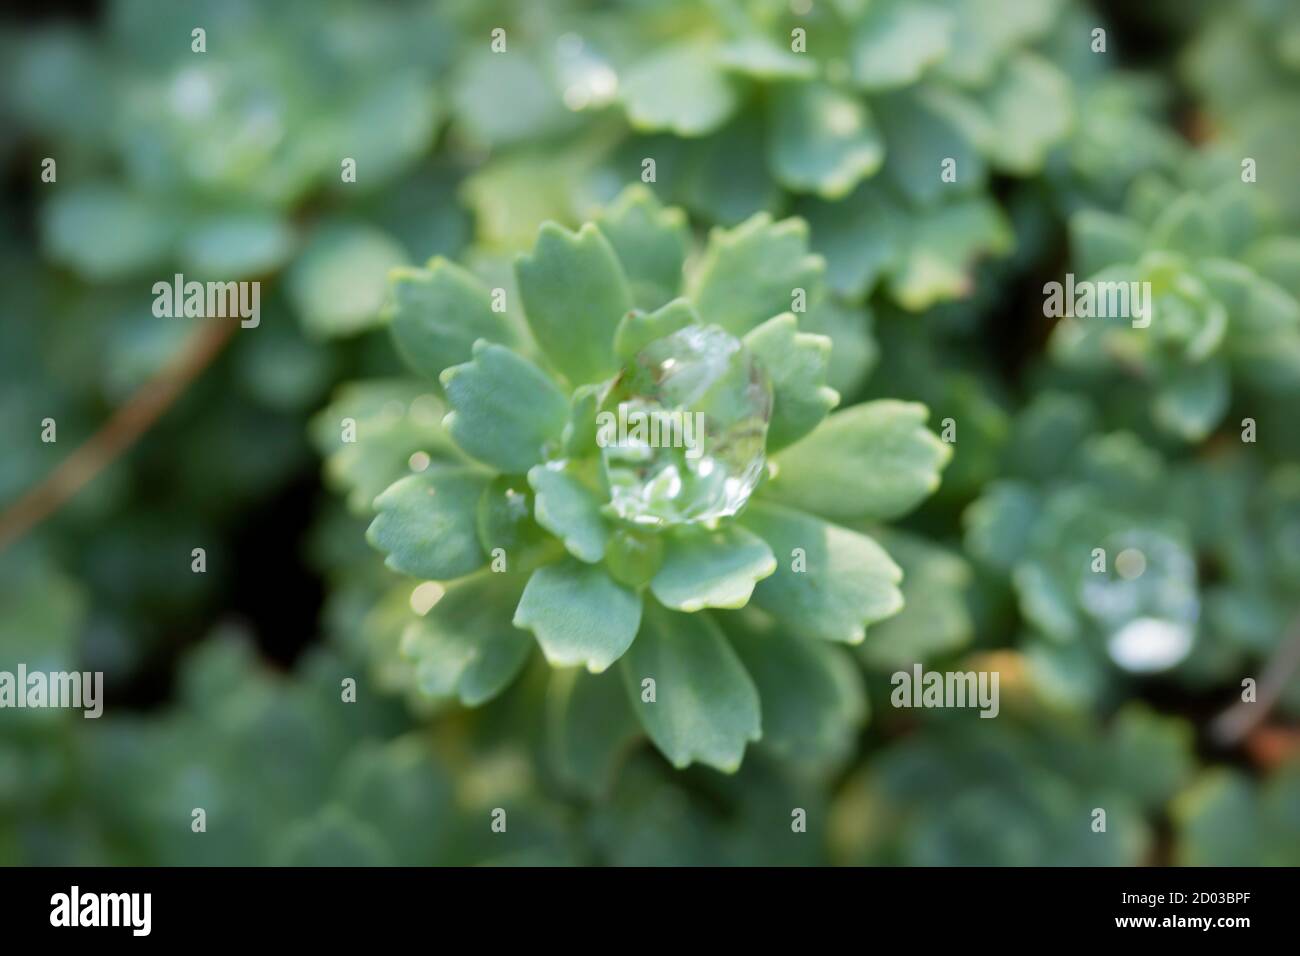 Rhodiola Pachyclados showing patterns and textures in close-up Stock Photo